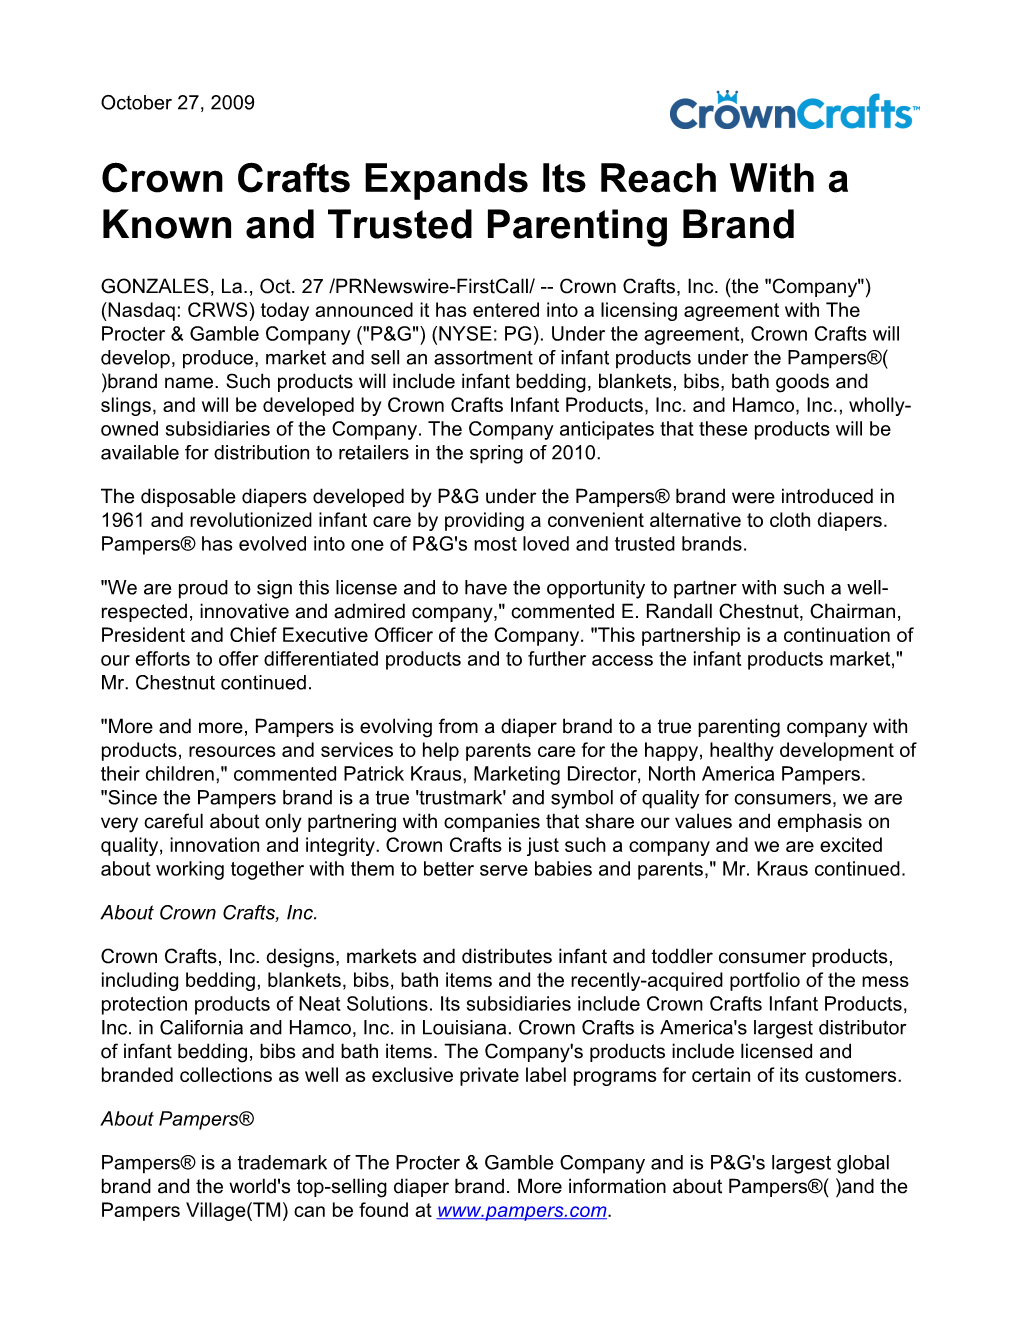 Crown Crafts Expands Its Reach with a Known and Trusted Parenting Brand